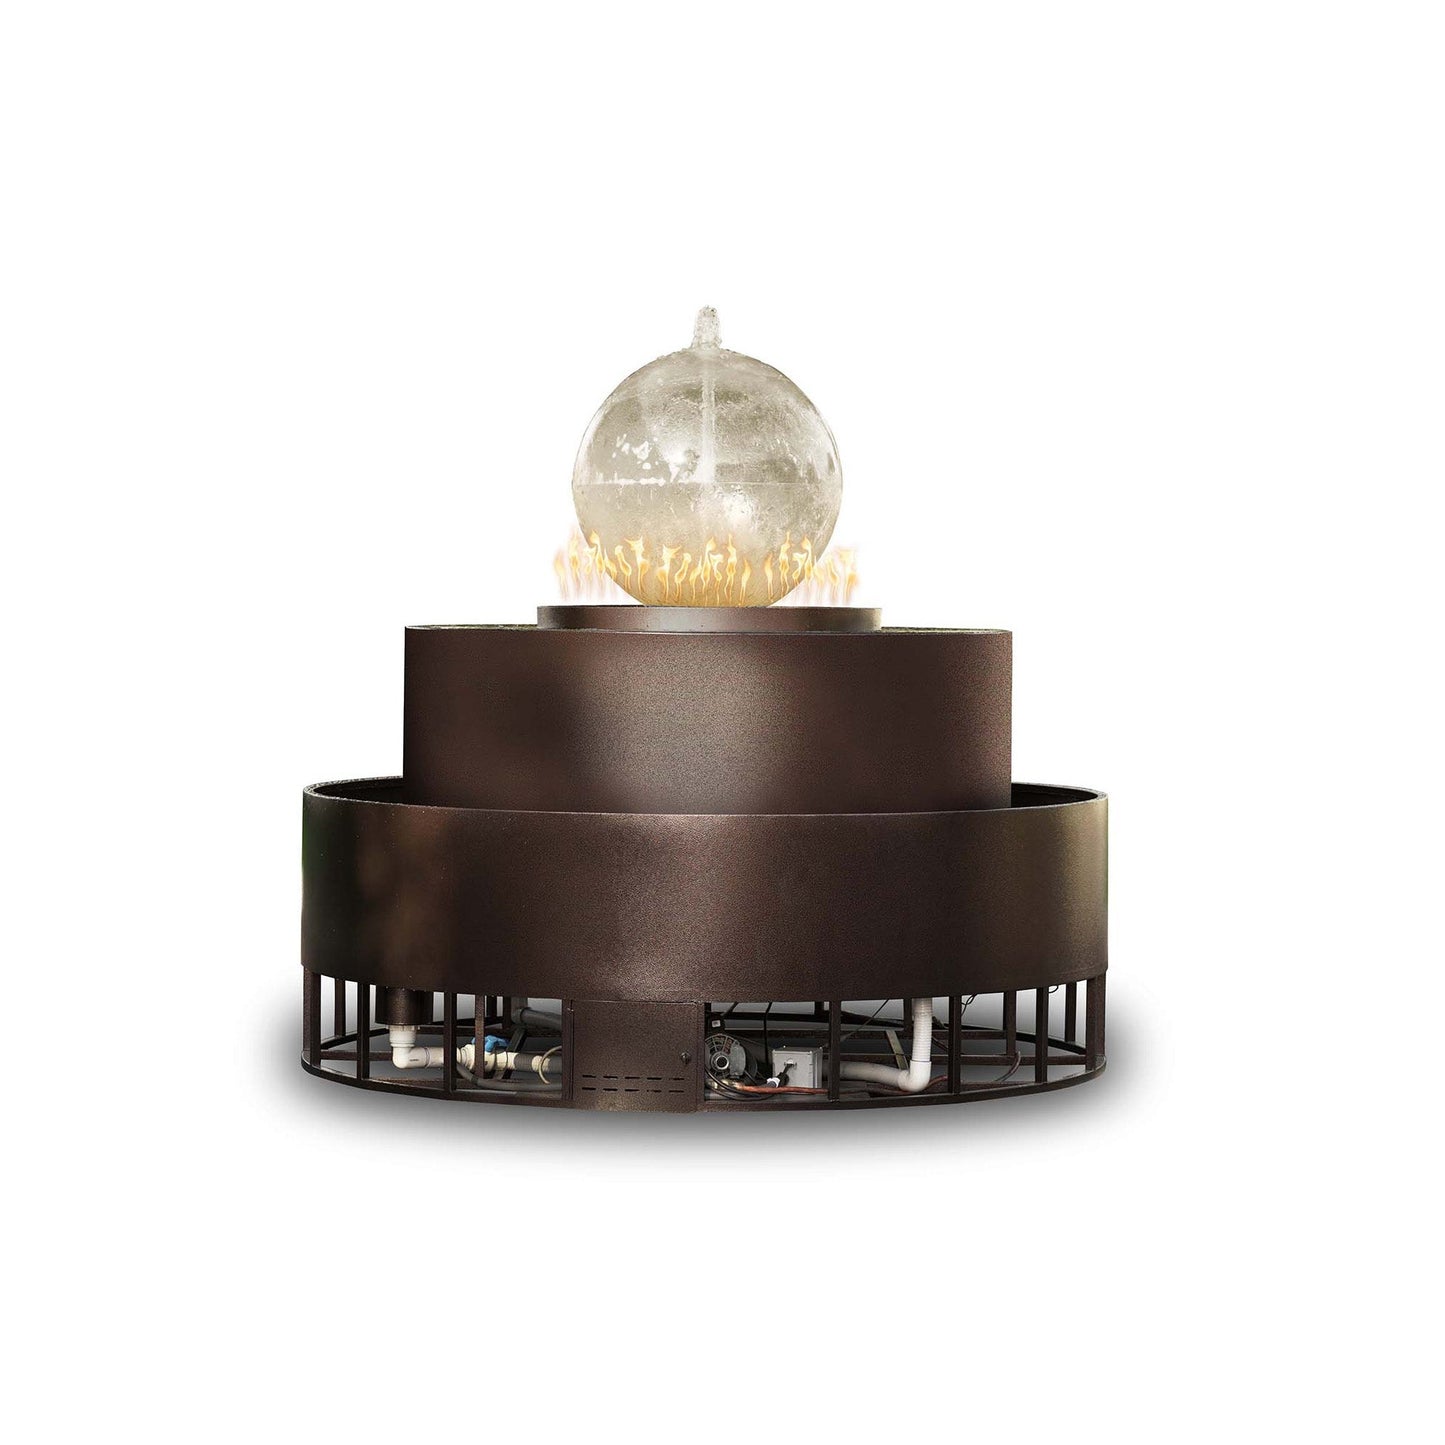 The Outdoor Plus Round Atlas 89" Pewter Powder Coated Natural Gas Fire & Water Fountain with 12V Electronic Ignition